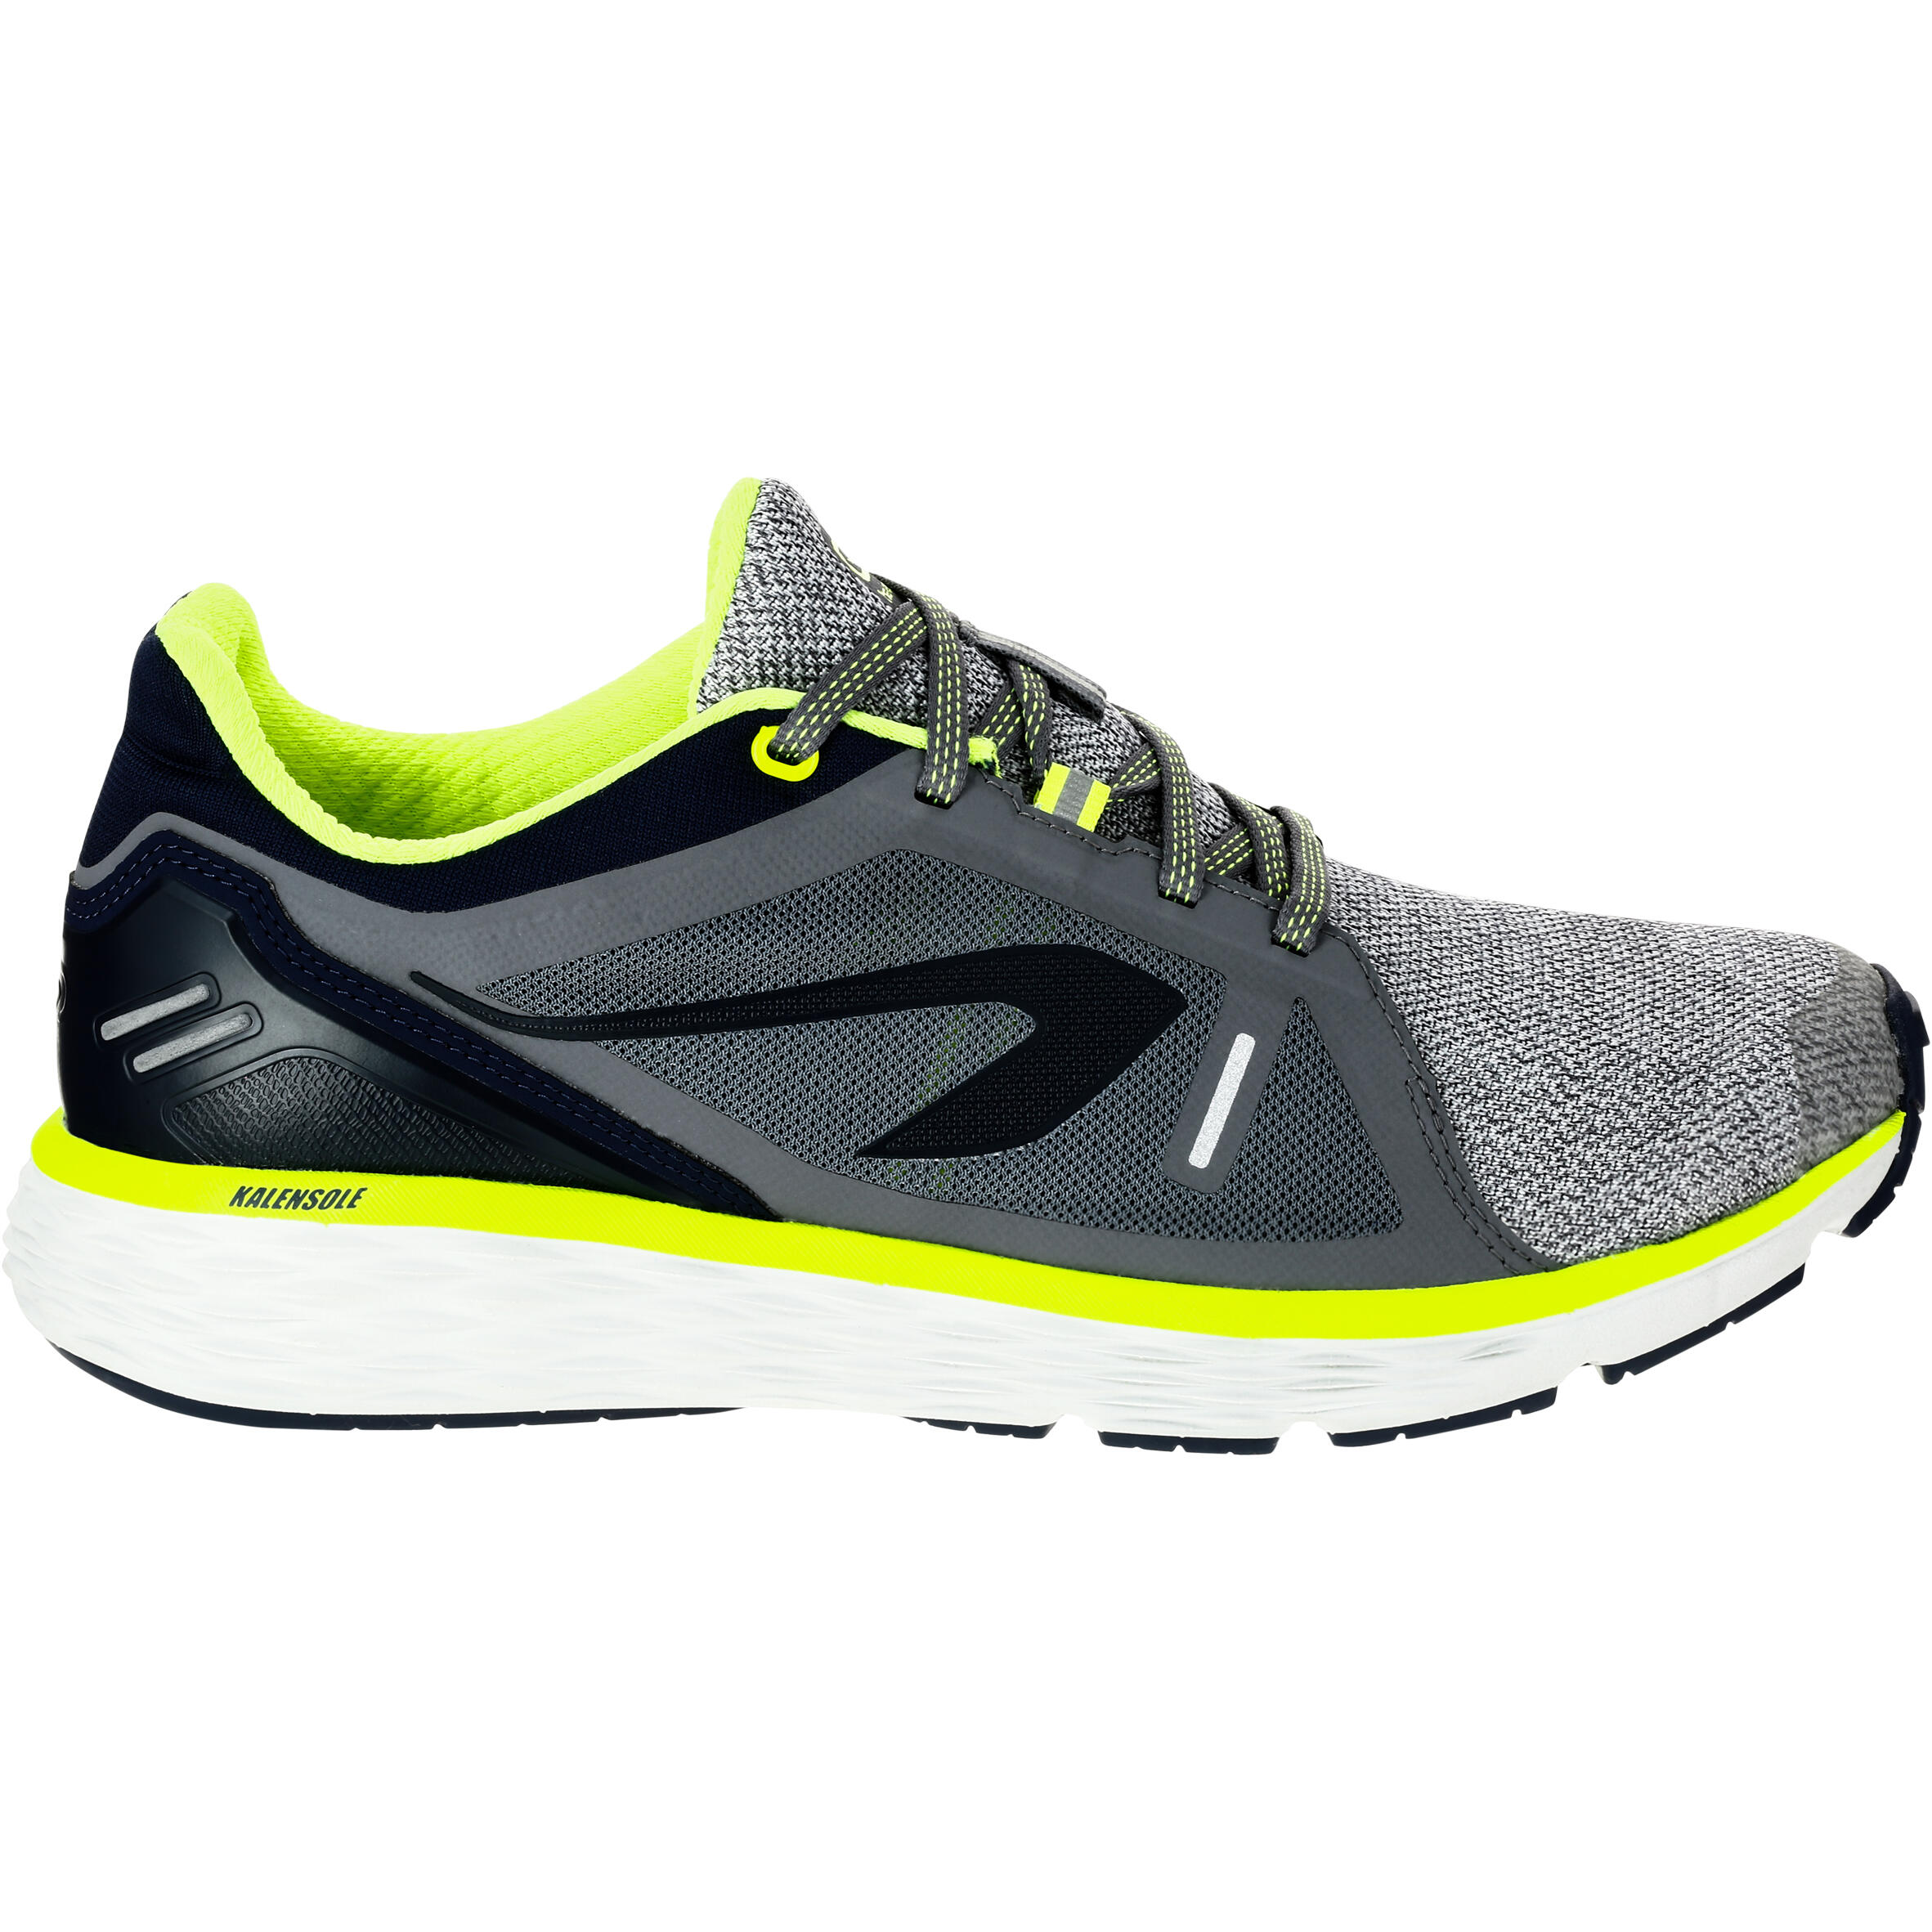 comfortable running shoes mens